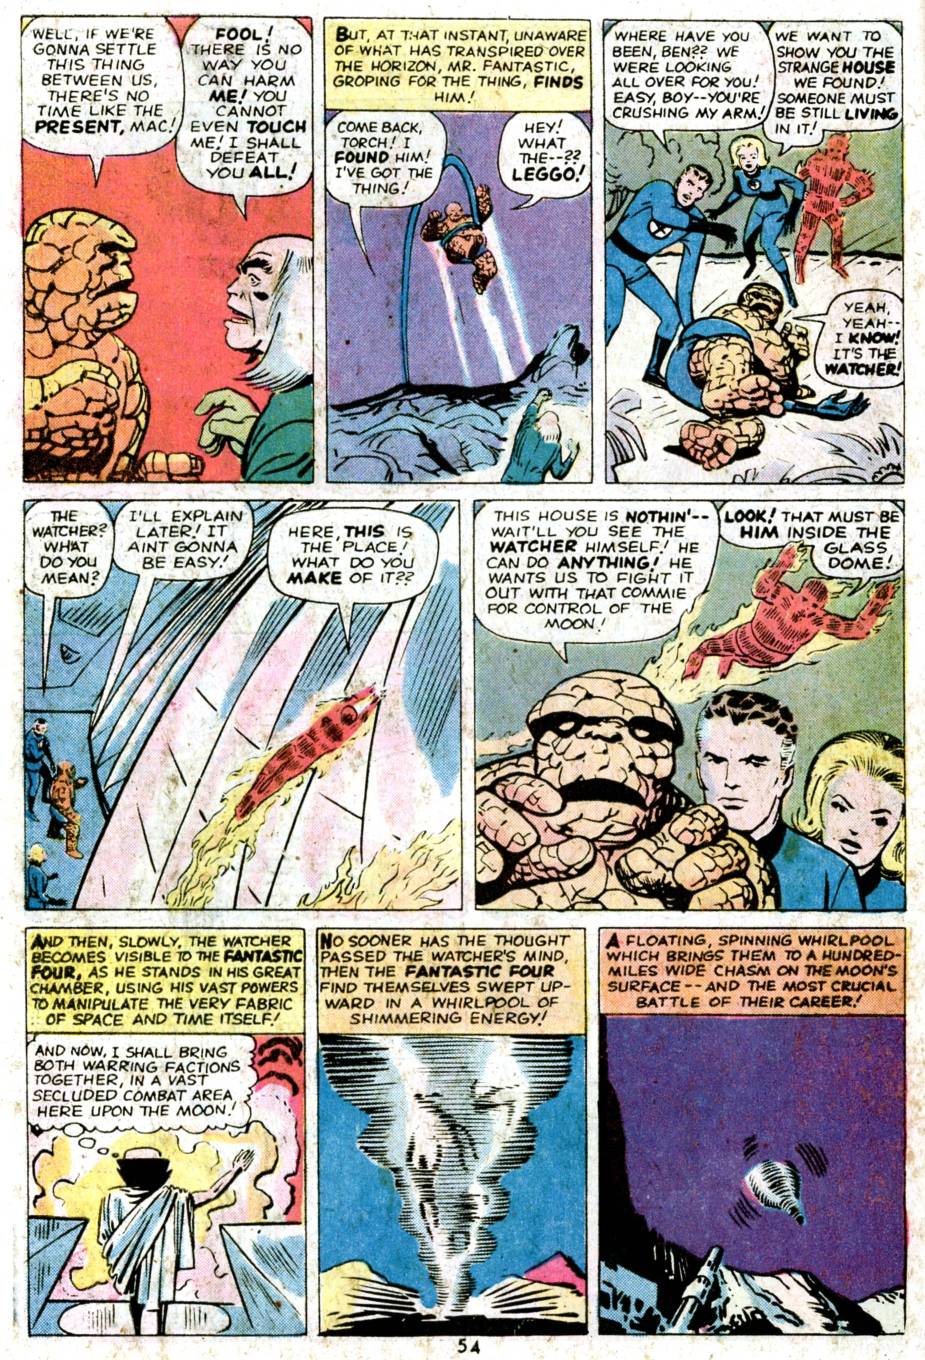 Read online Giant-Size Fantastic Four comic -  Issue #2 - 56